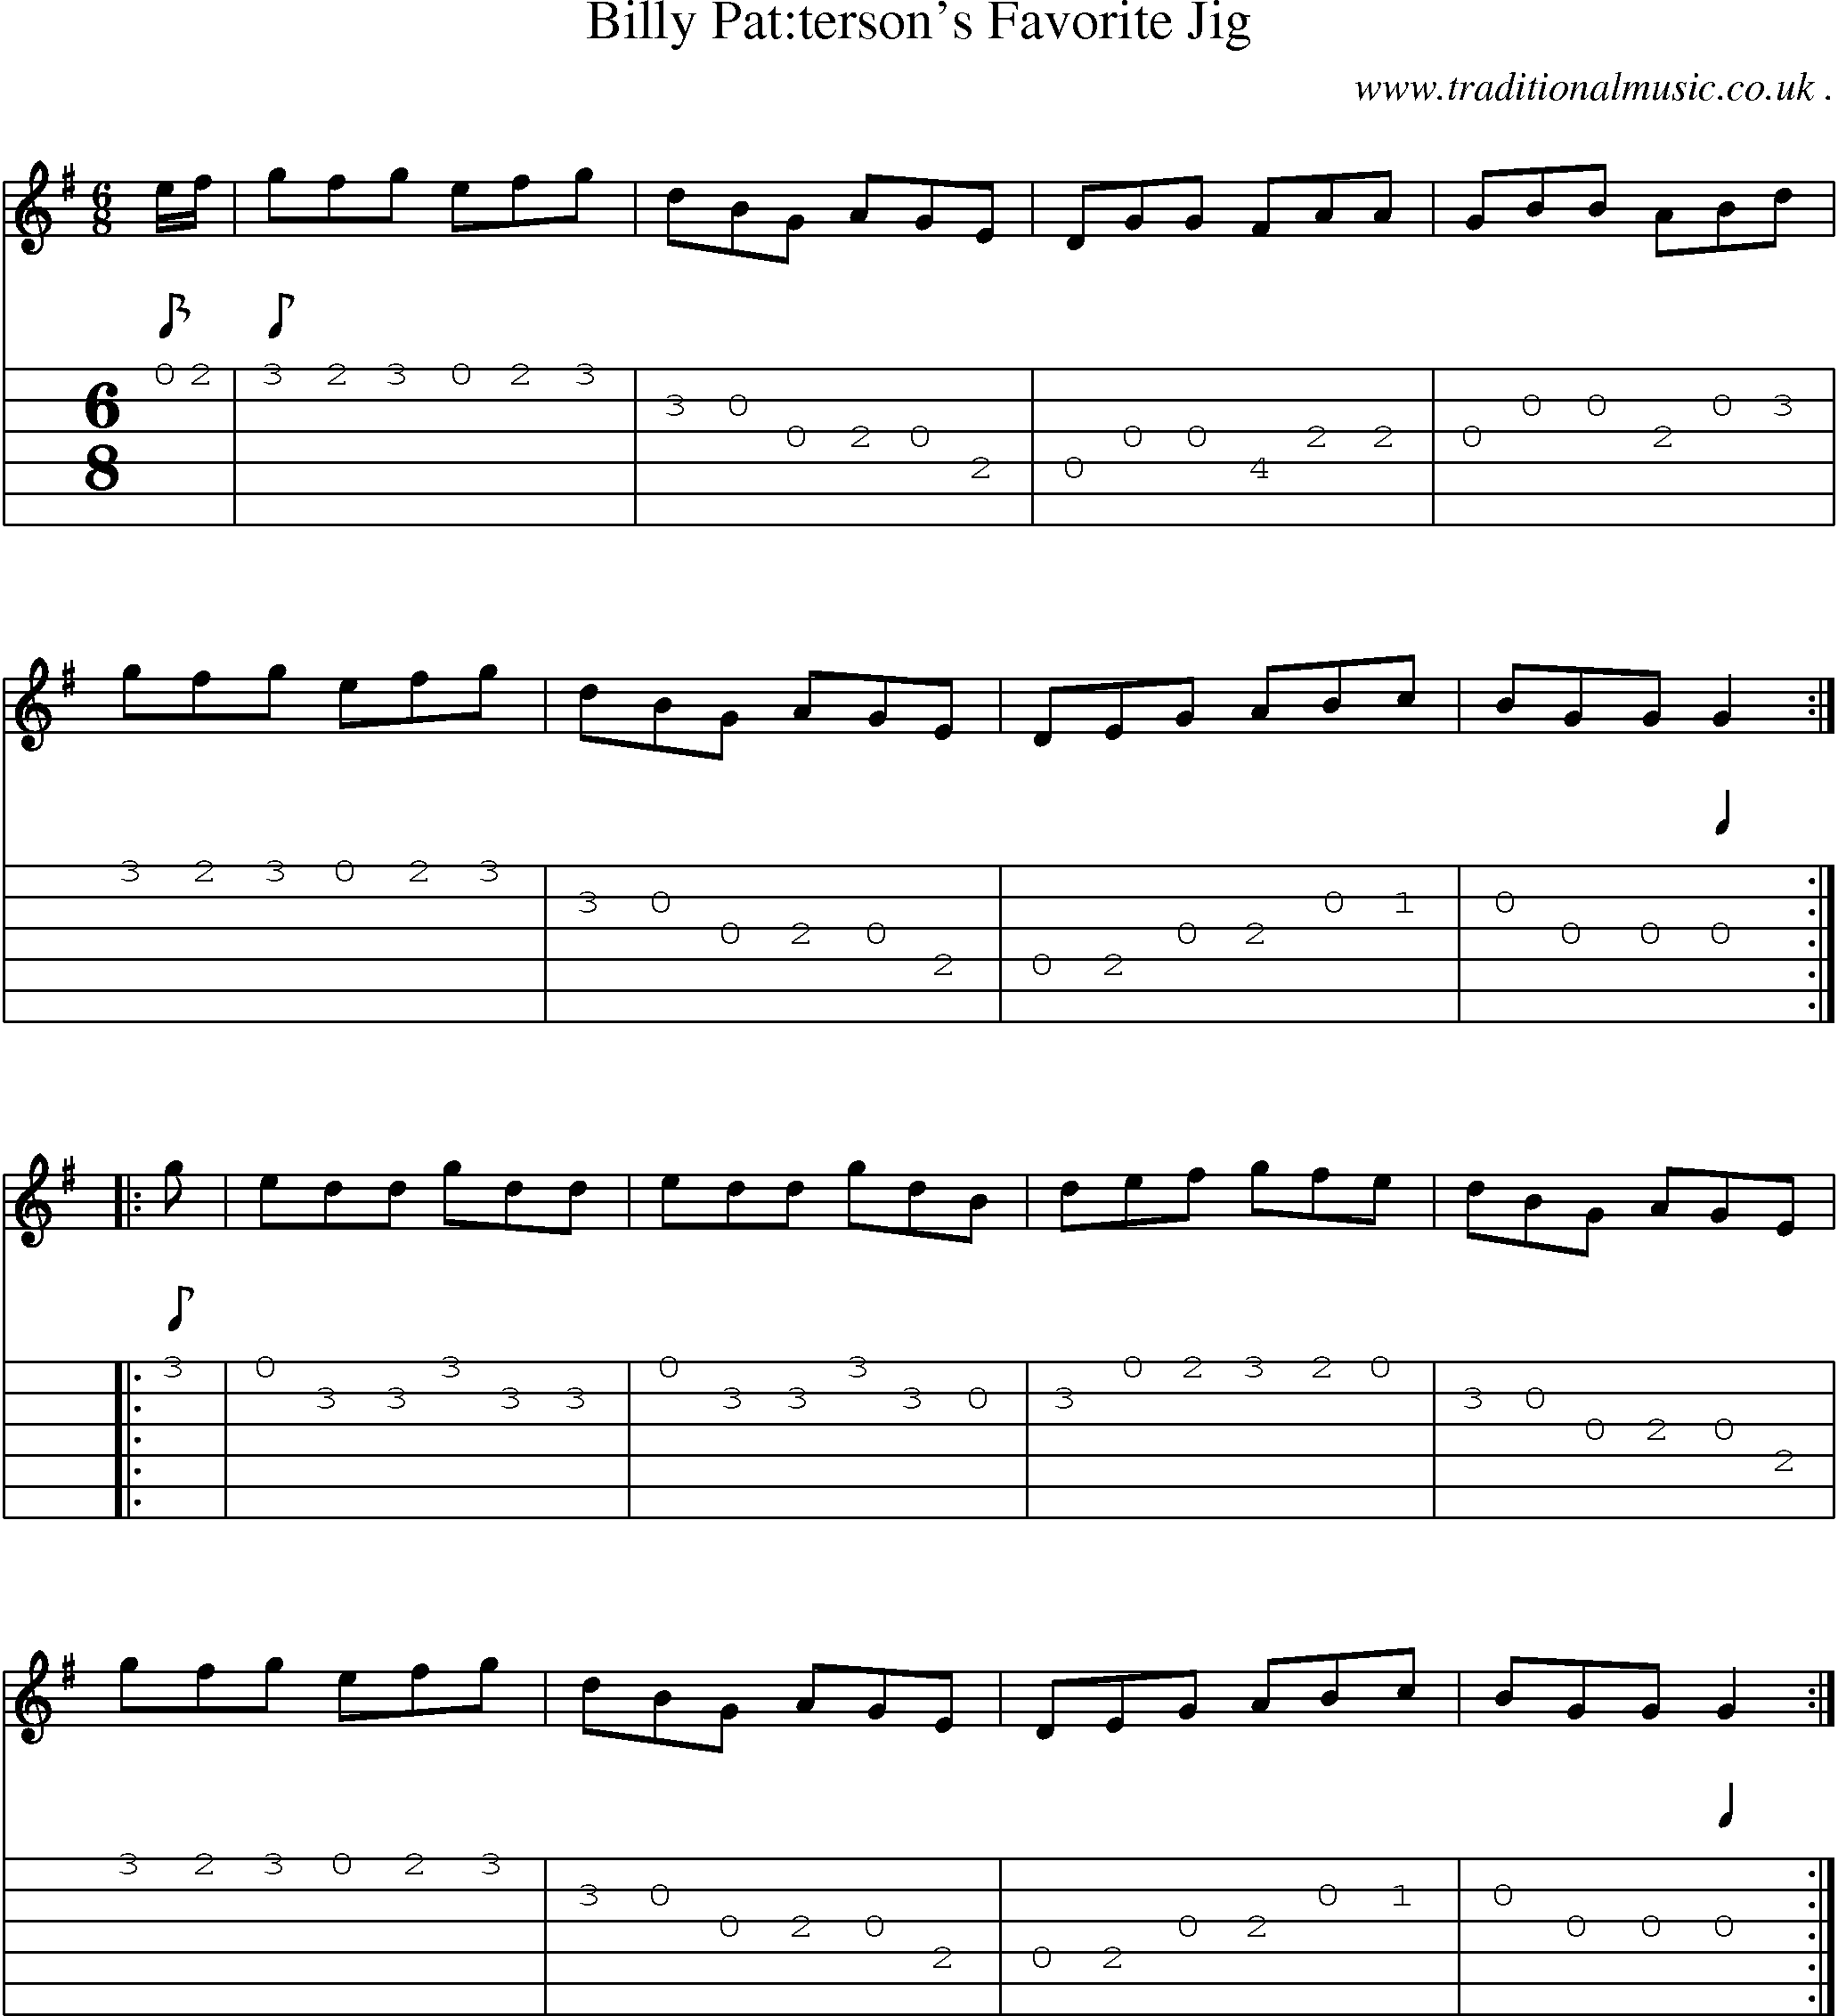 Sheet-Music and Guitar Tabs for Billy Pattersons Favorite Jig